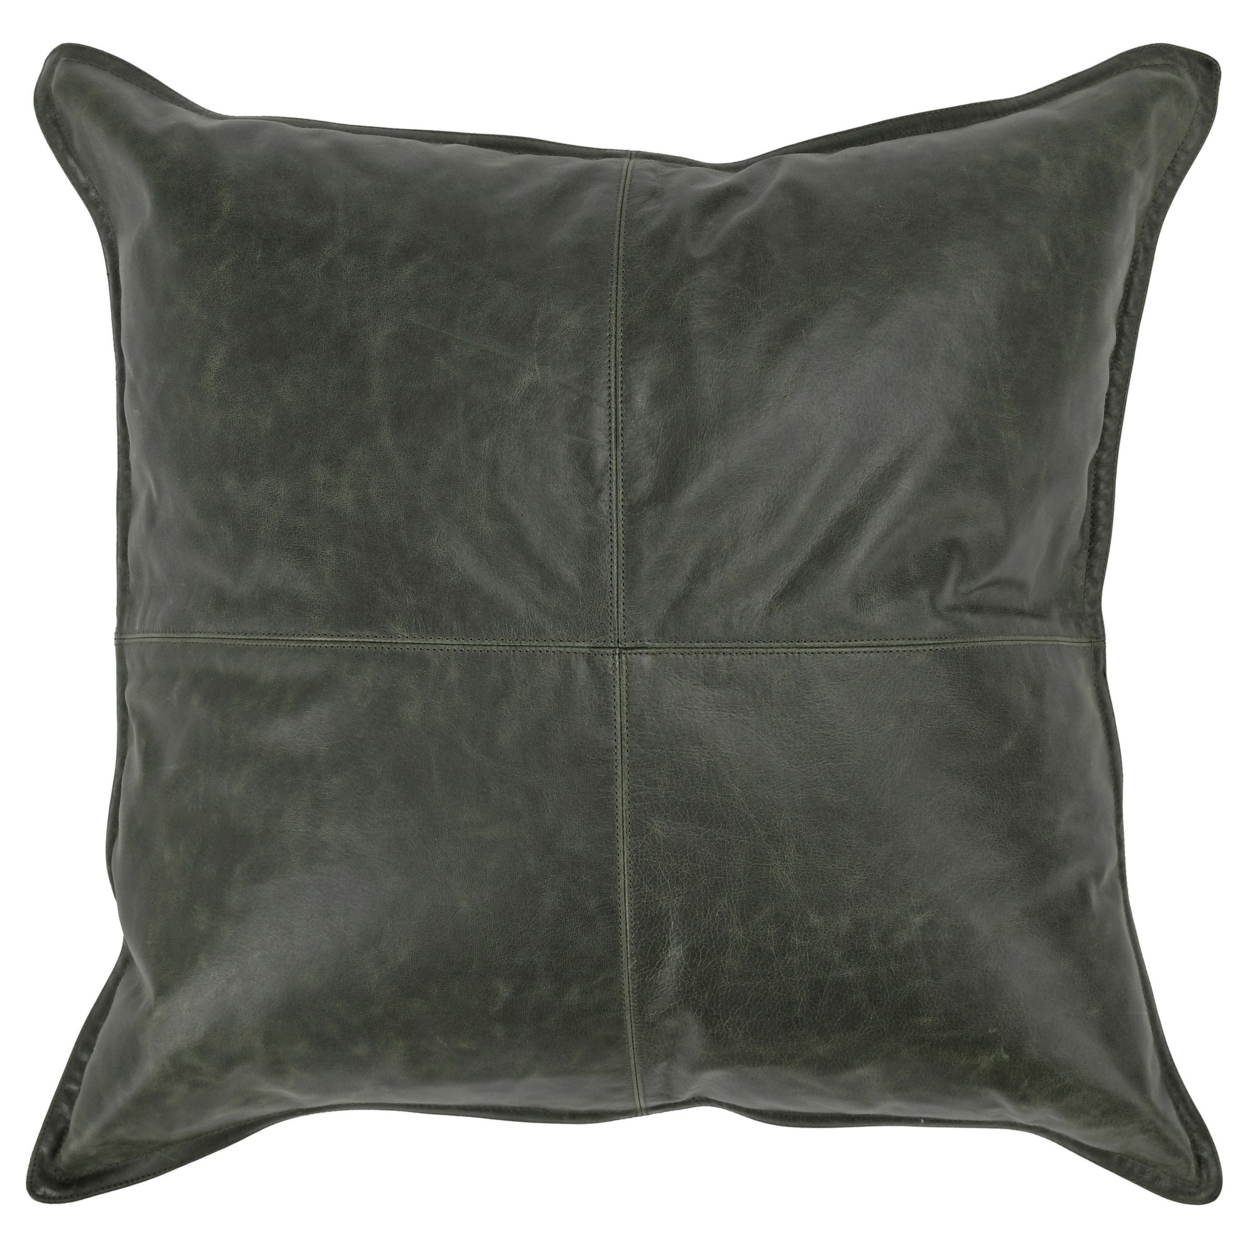 Norm 22 Inch Square Accent Throw Pillow, Pieced Design Forest Green Leather- Saltoro Sherpi